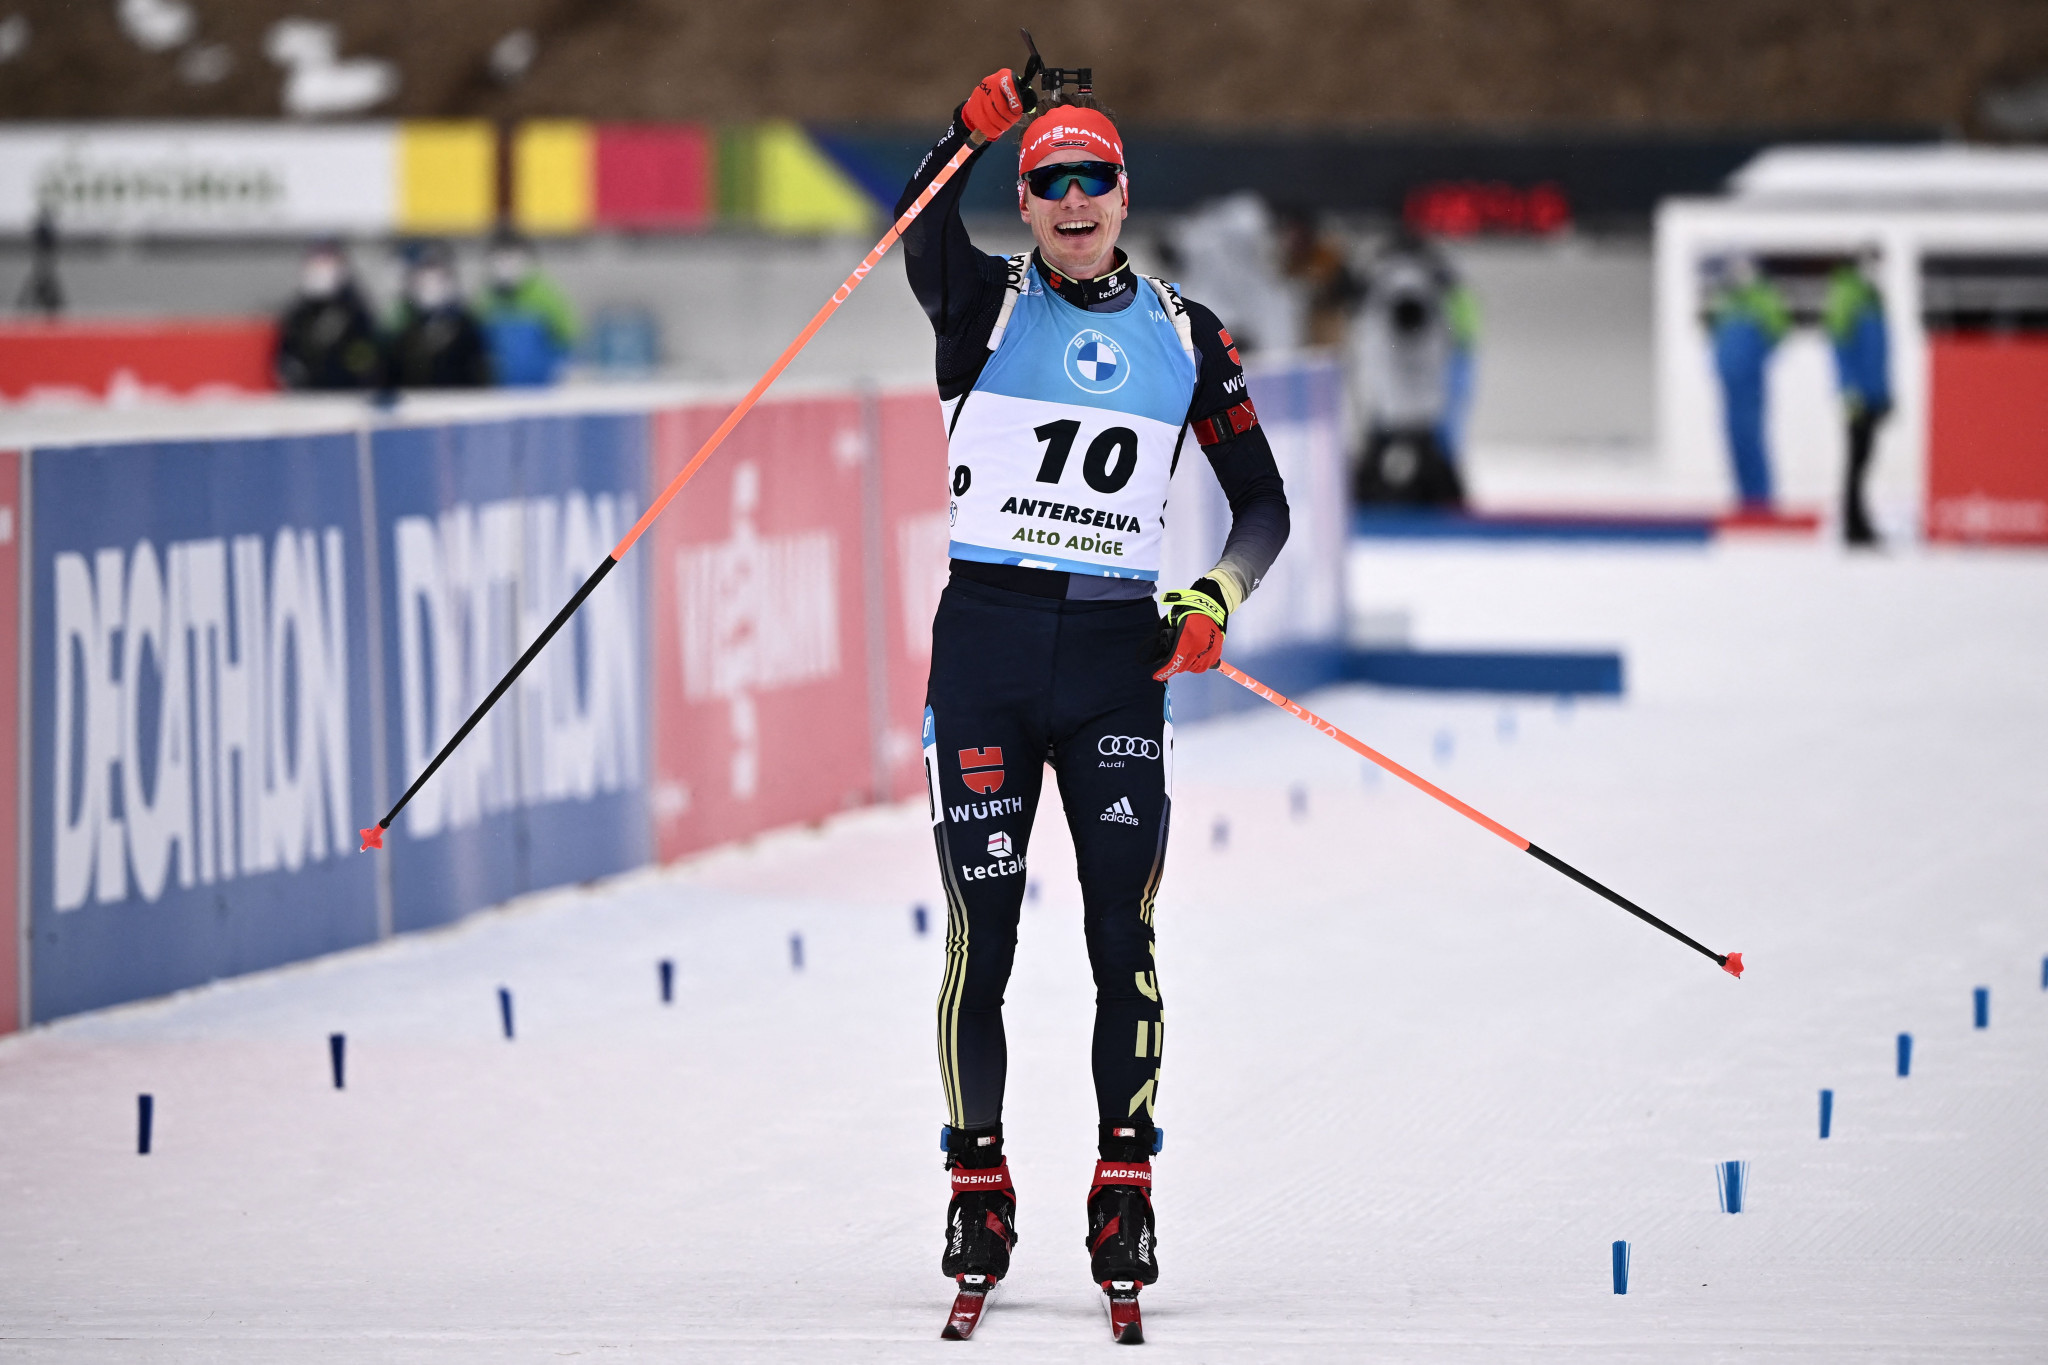 Benedikt Doll claimed his first victory in this season's Biathlon World Cup ©Getty Images